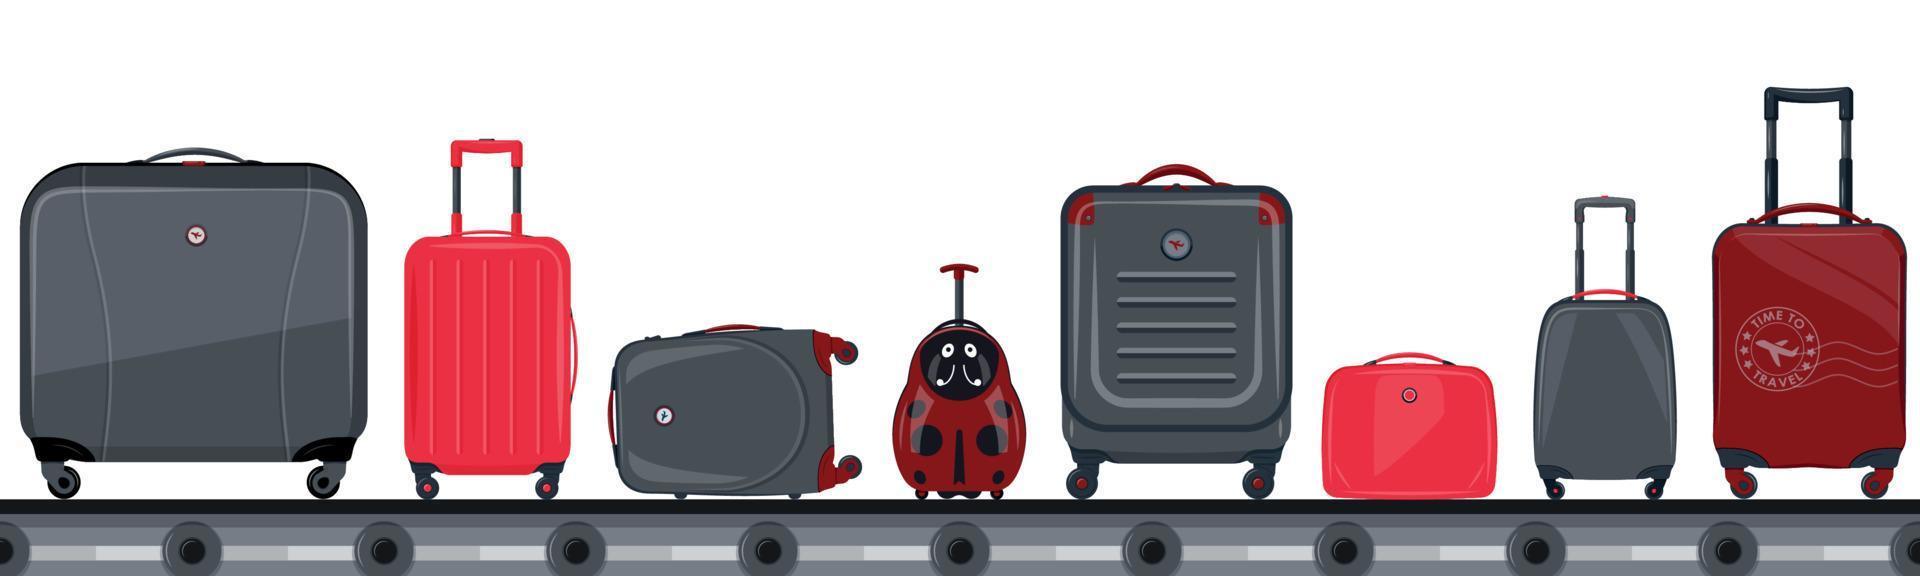 Airport Conveyor Belt With Passenger Luggage vector